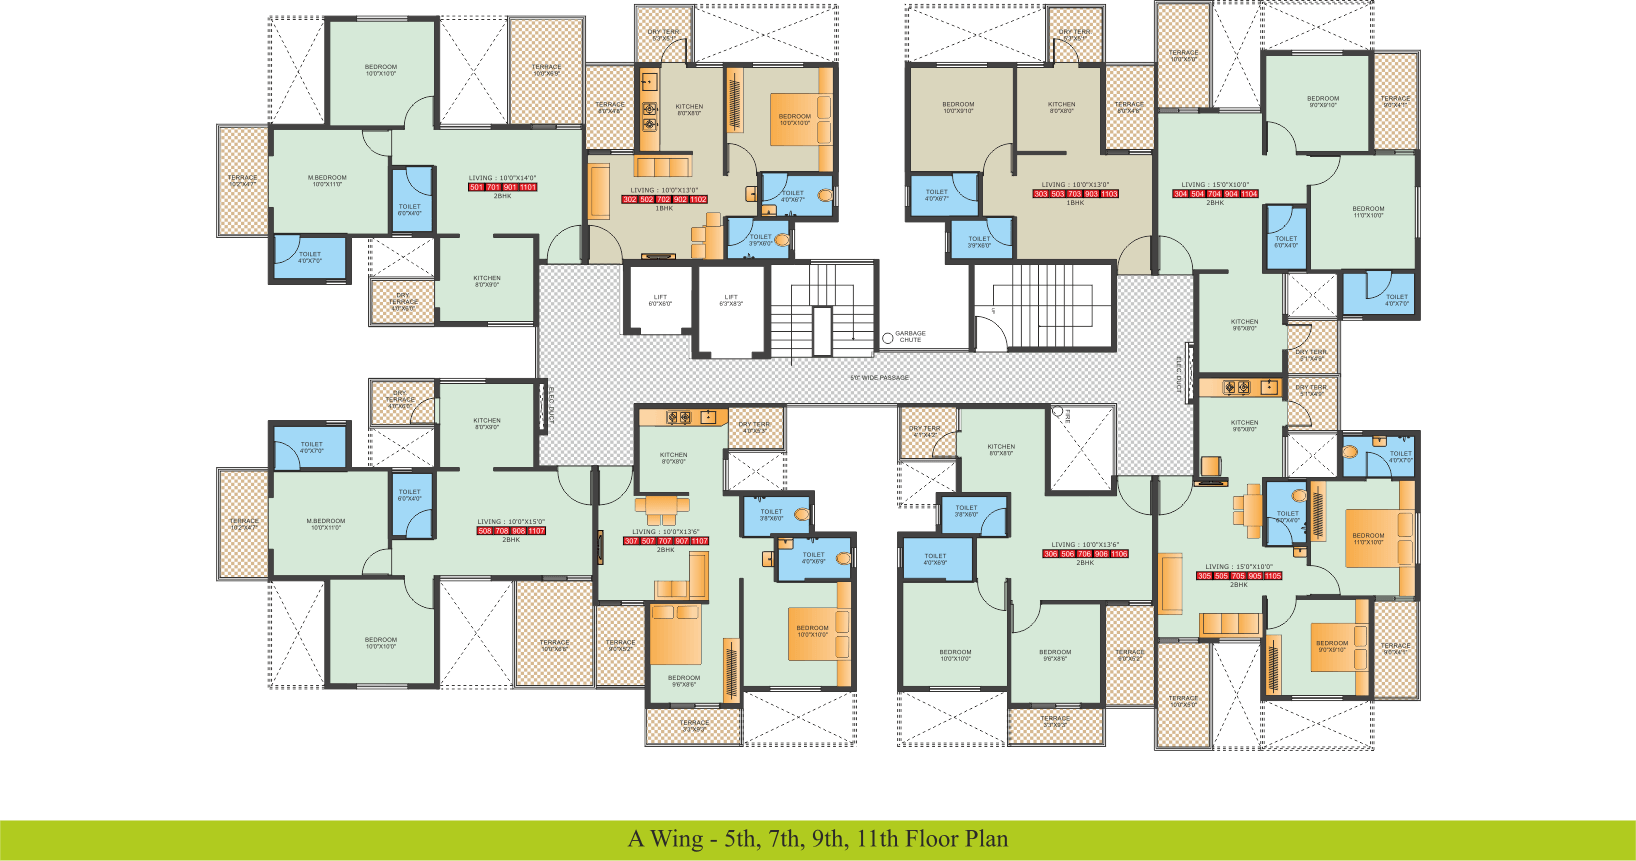 A Wing 5th, 7th, 9th, 11th Floor Plan